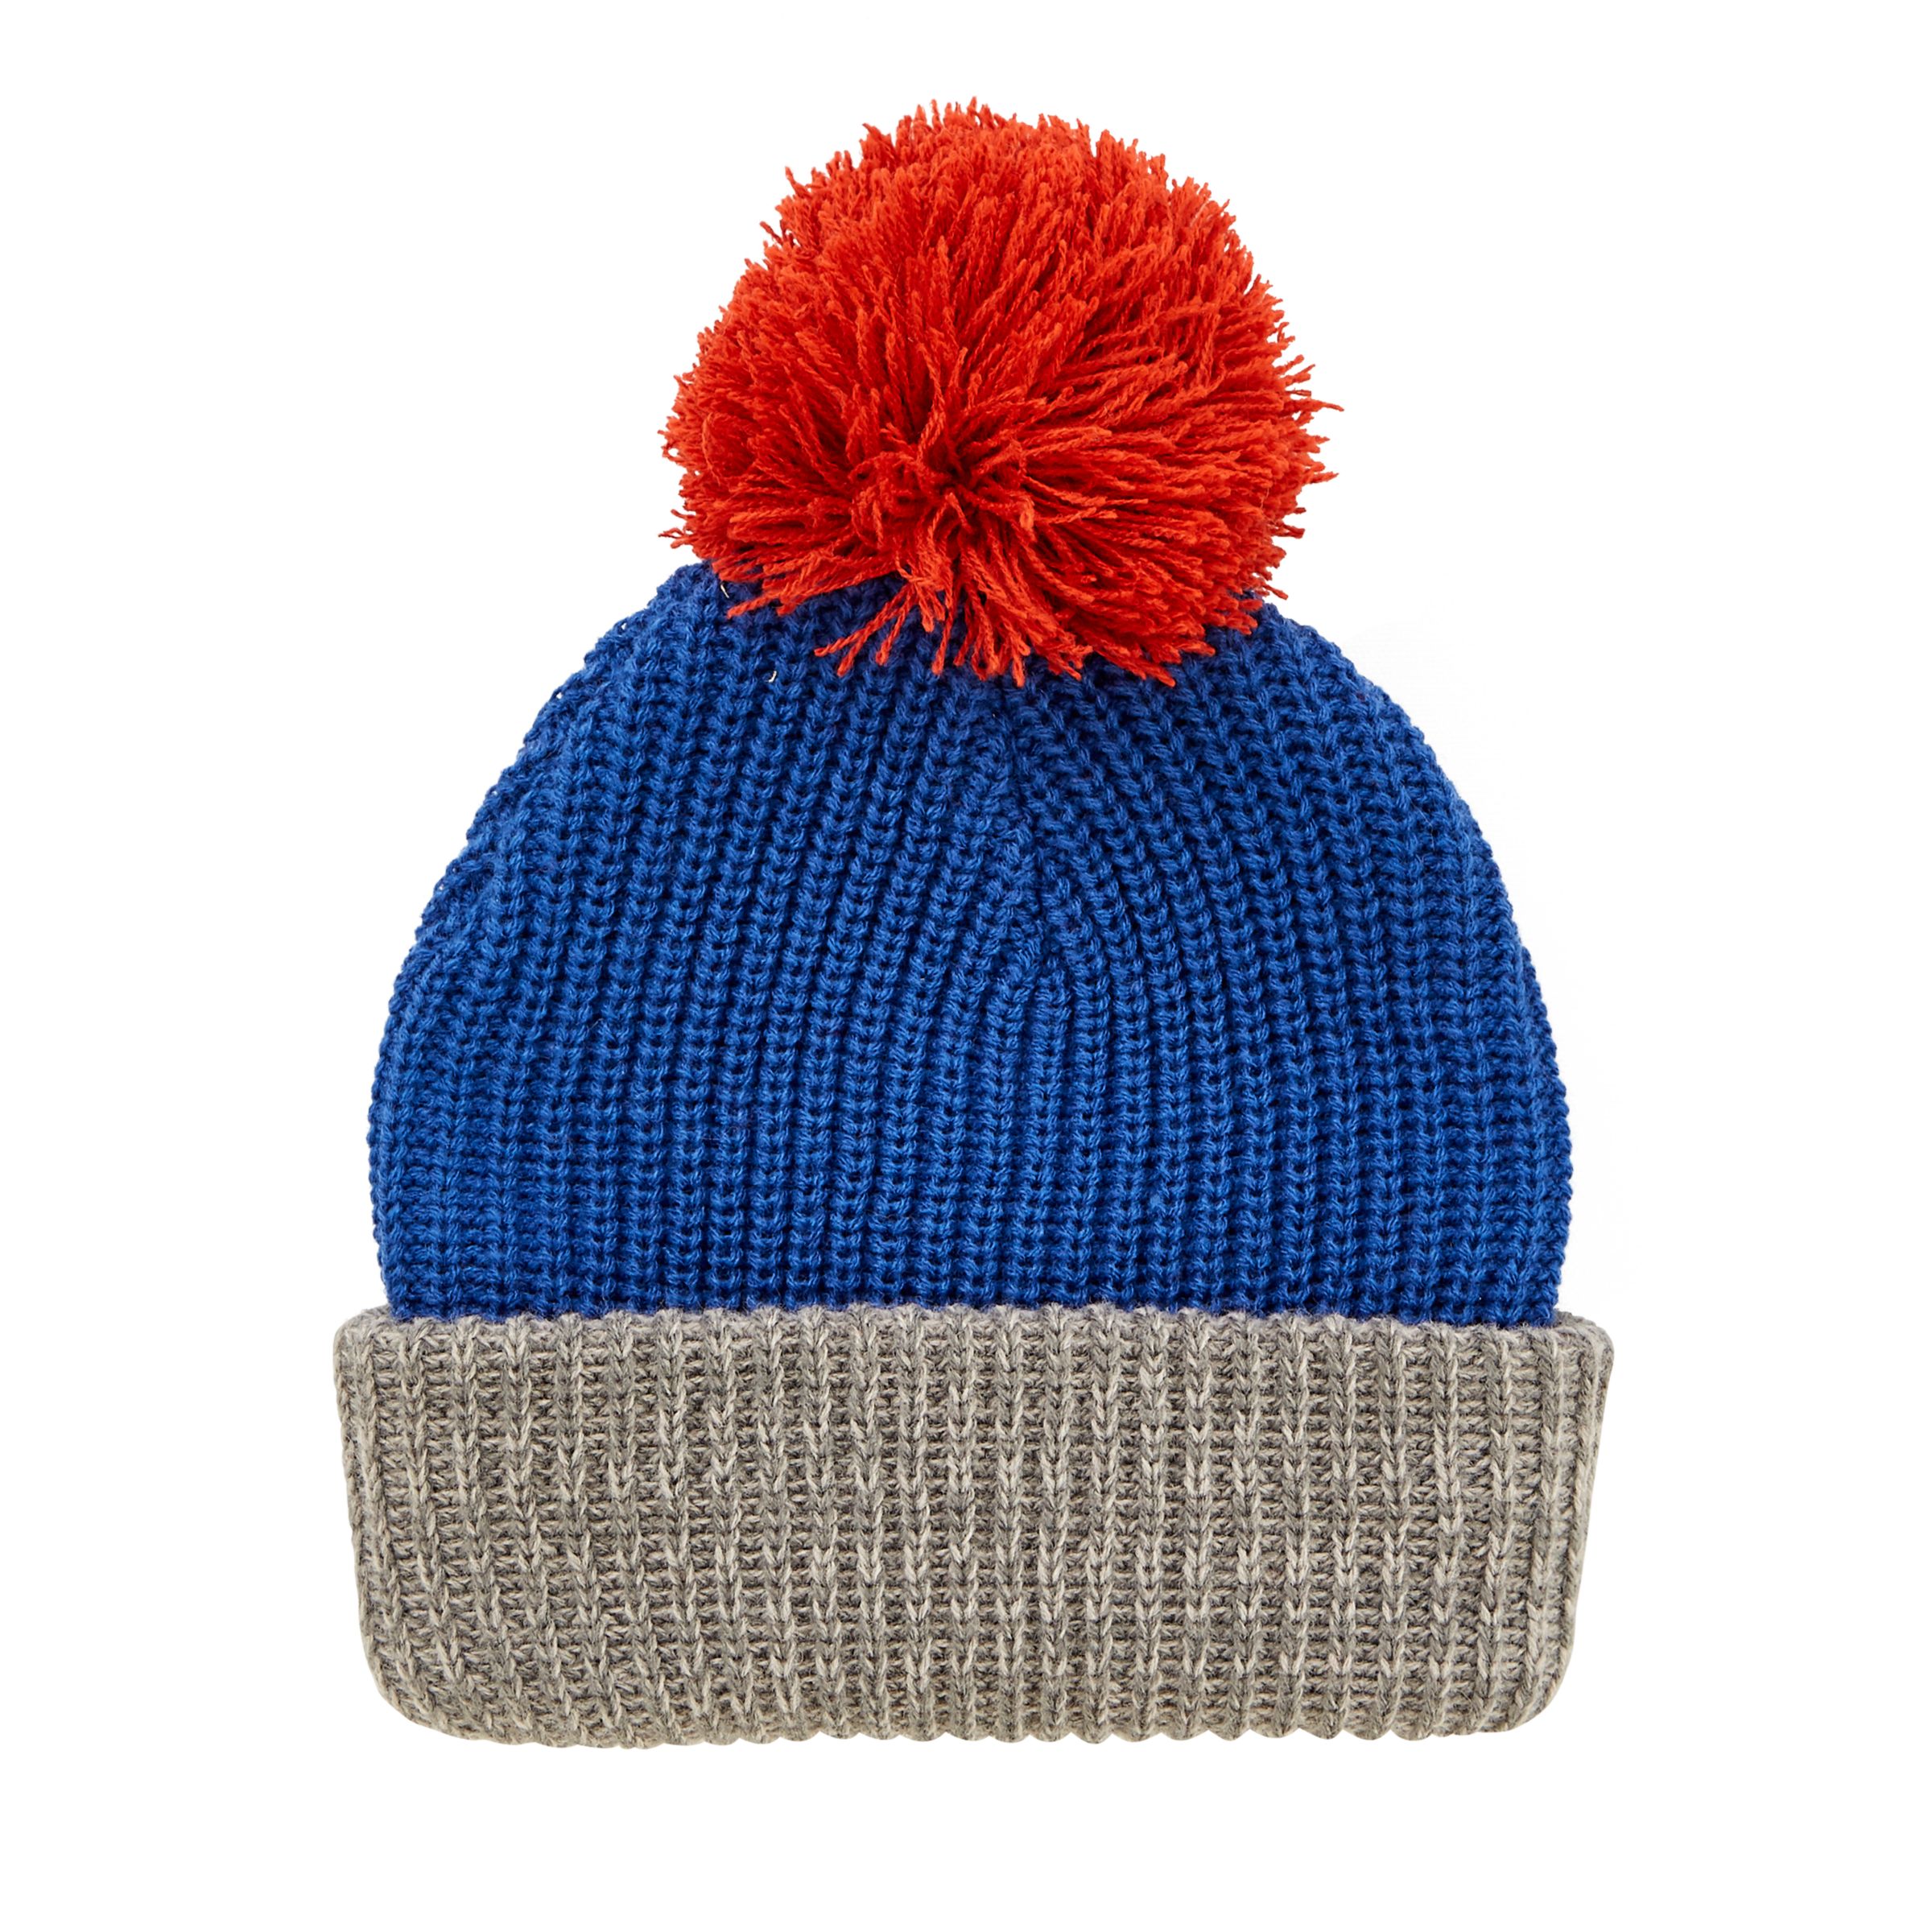 John Lewis & Partners Children's Contrast Knitted Bobble Hat, Blue/Grey/Red, 3 - 5 years